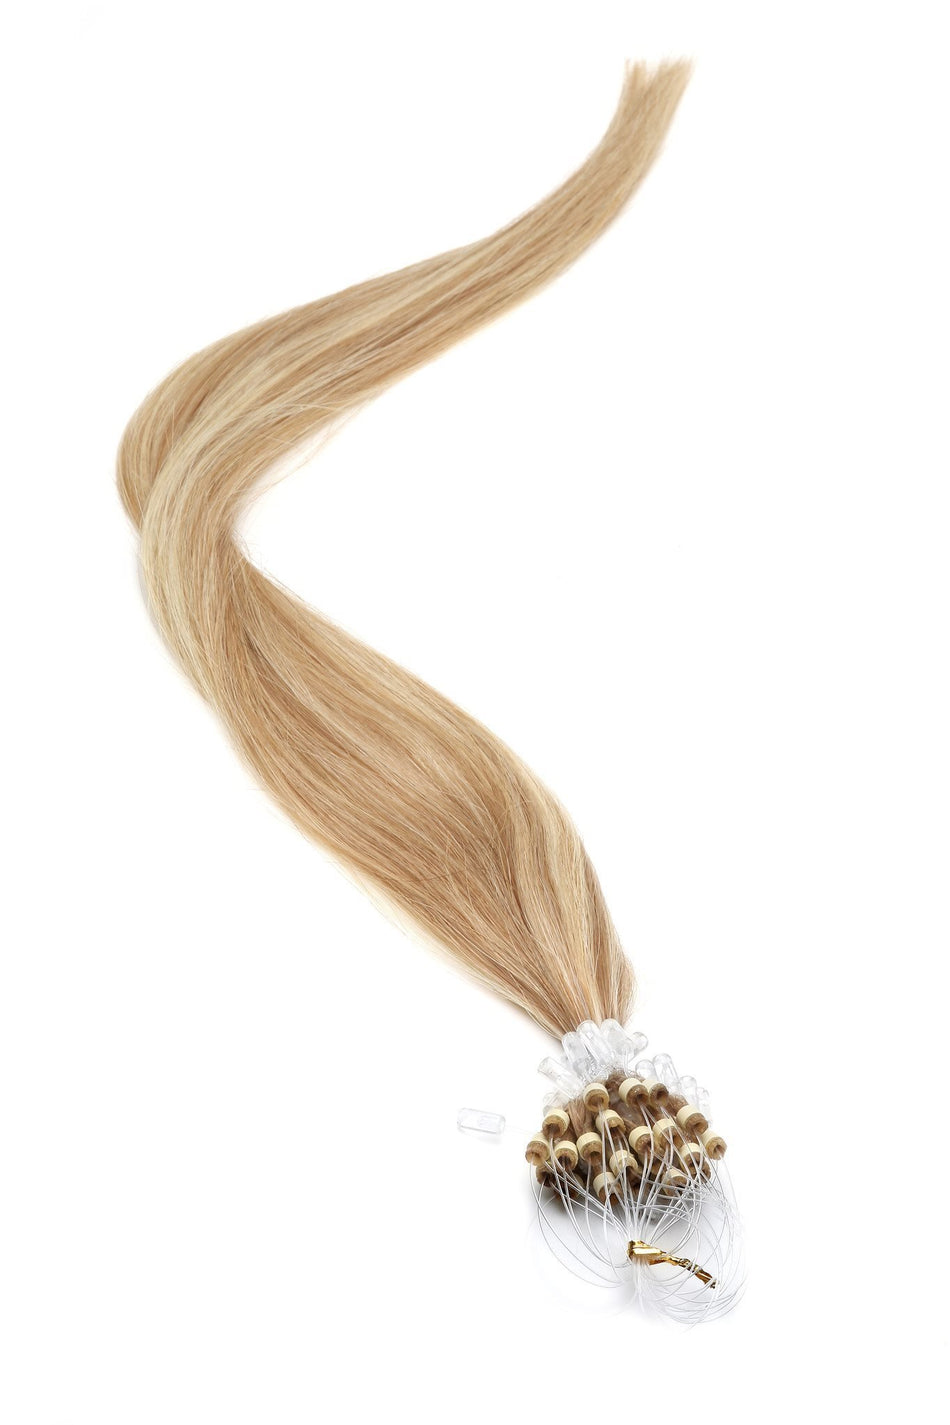 Micro Ring Hair Extensions | 18 inch | Mousey Brown Blonde (18-22Mix) - Beauty Hair Products LtdHair Extensions